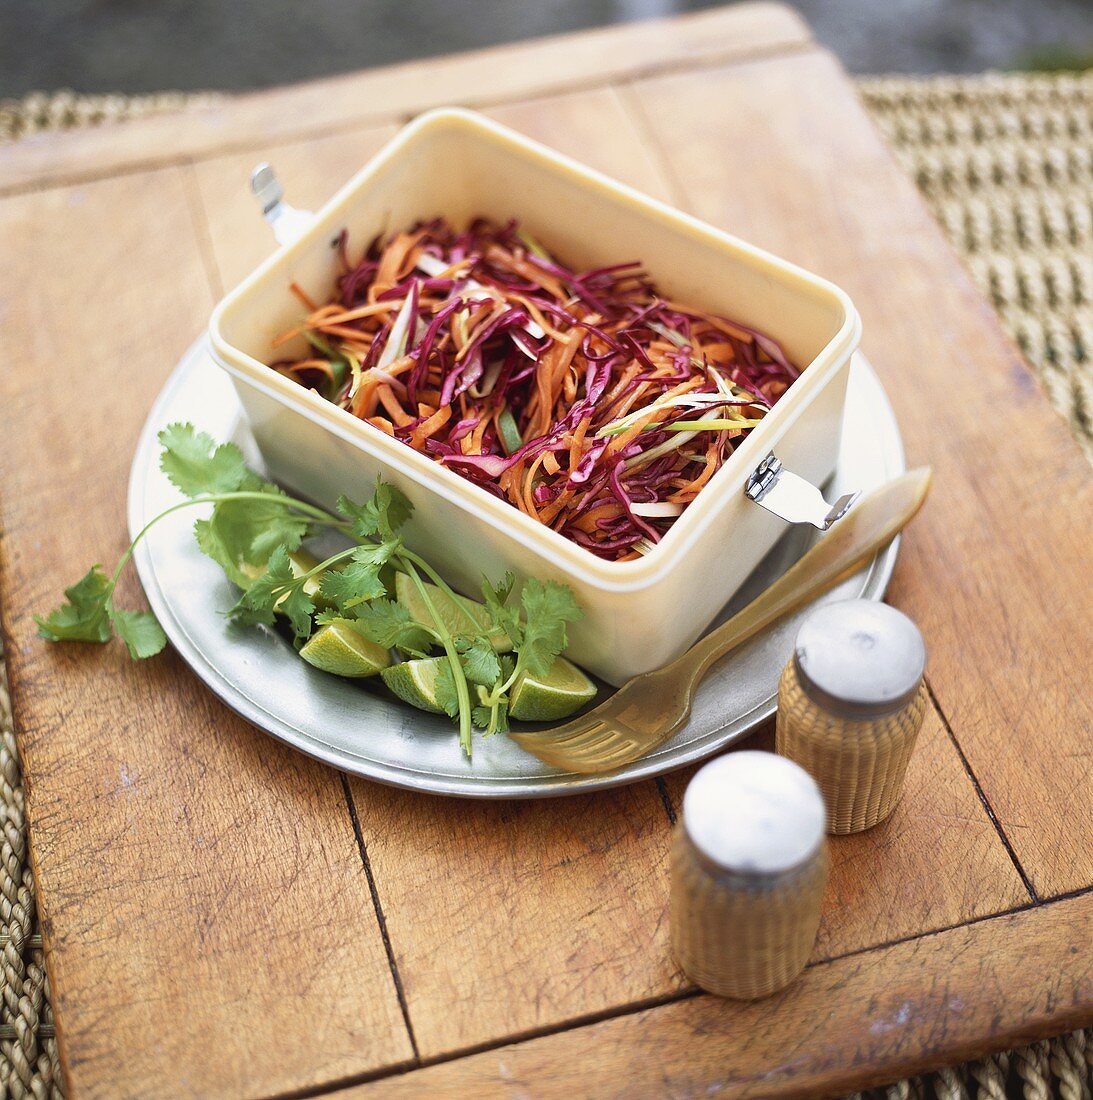 Carrot and red cabbage salad for a picnic